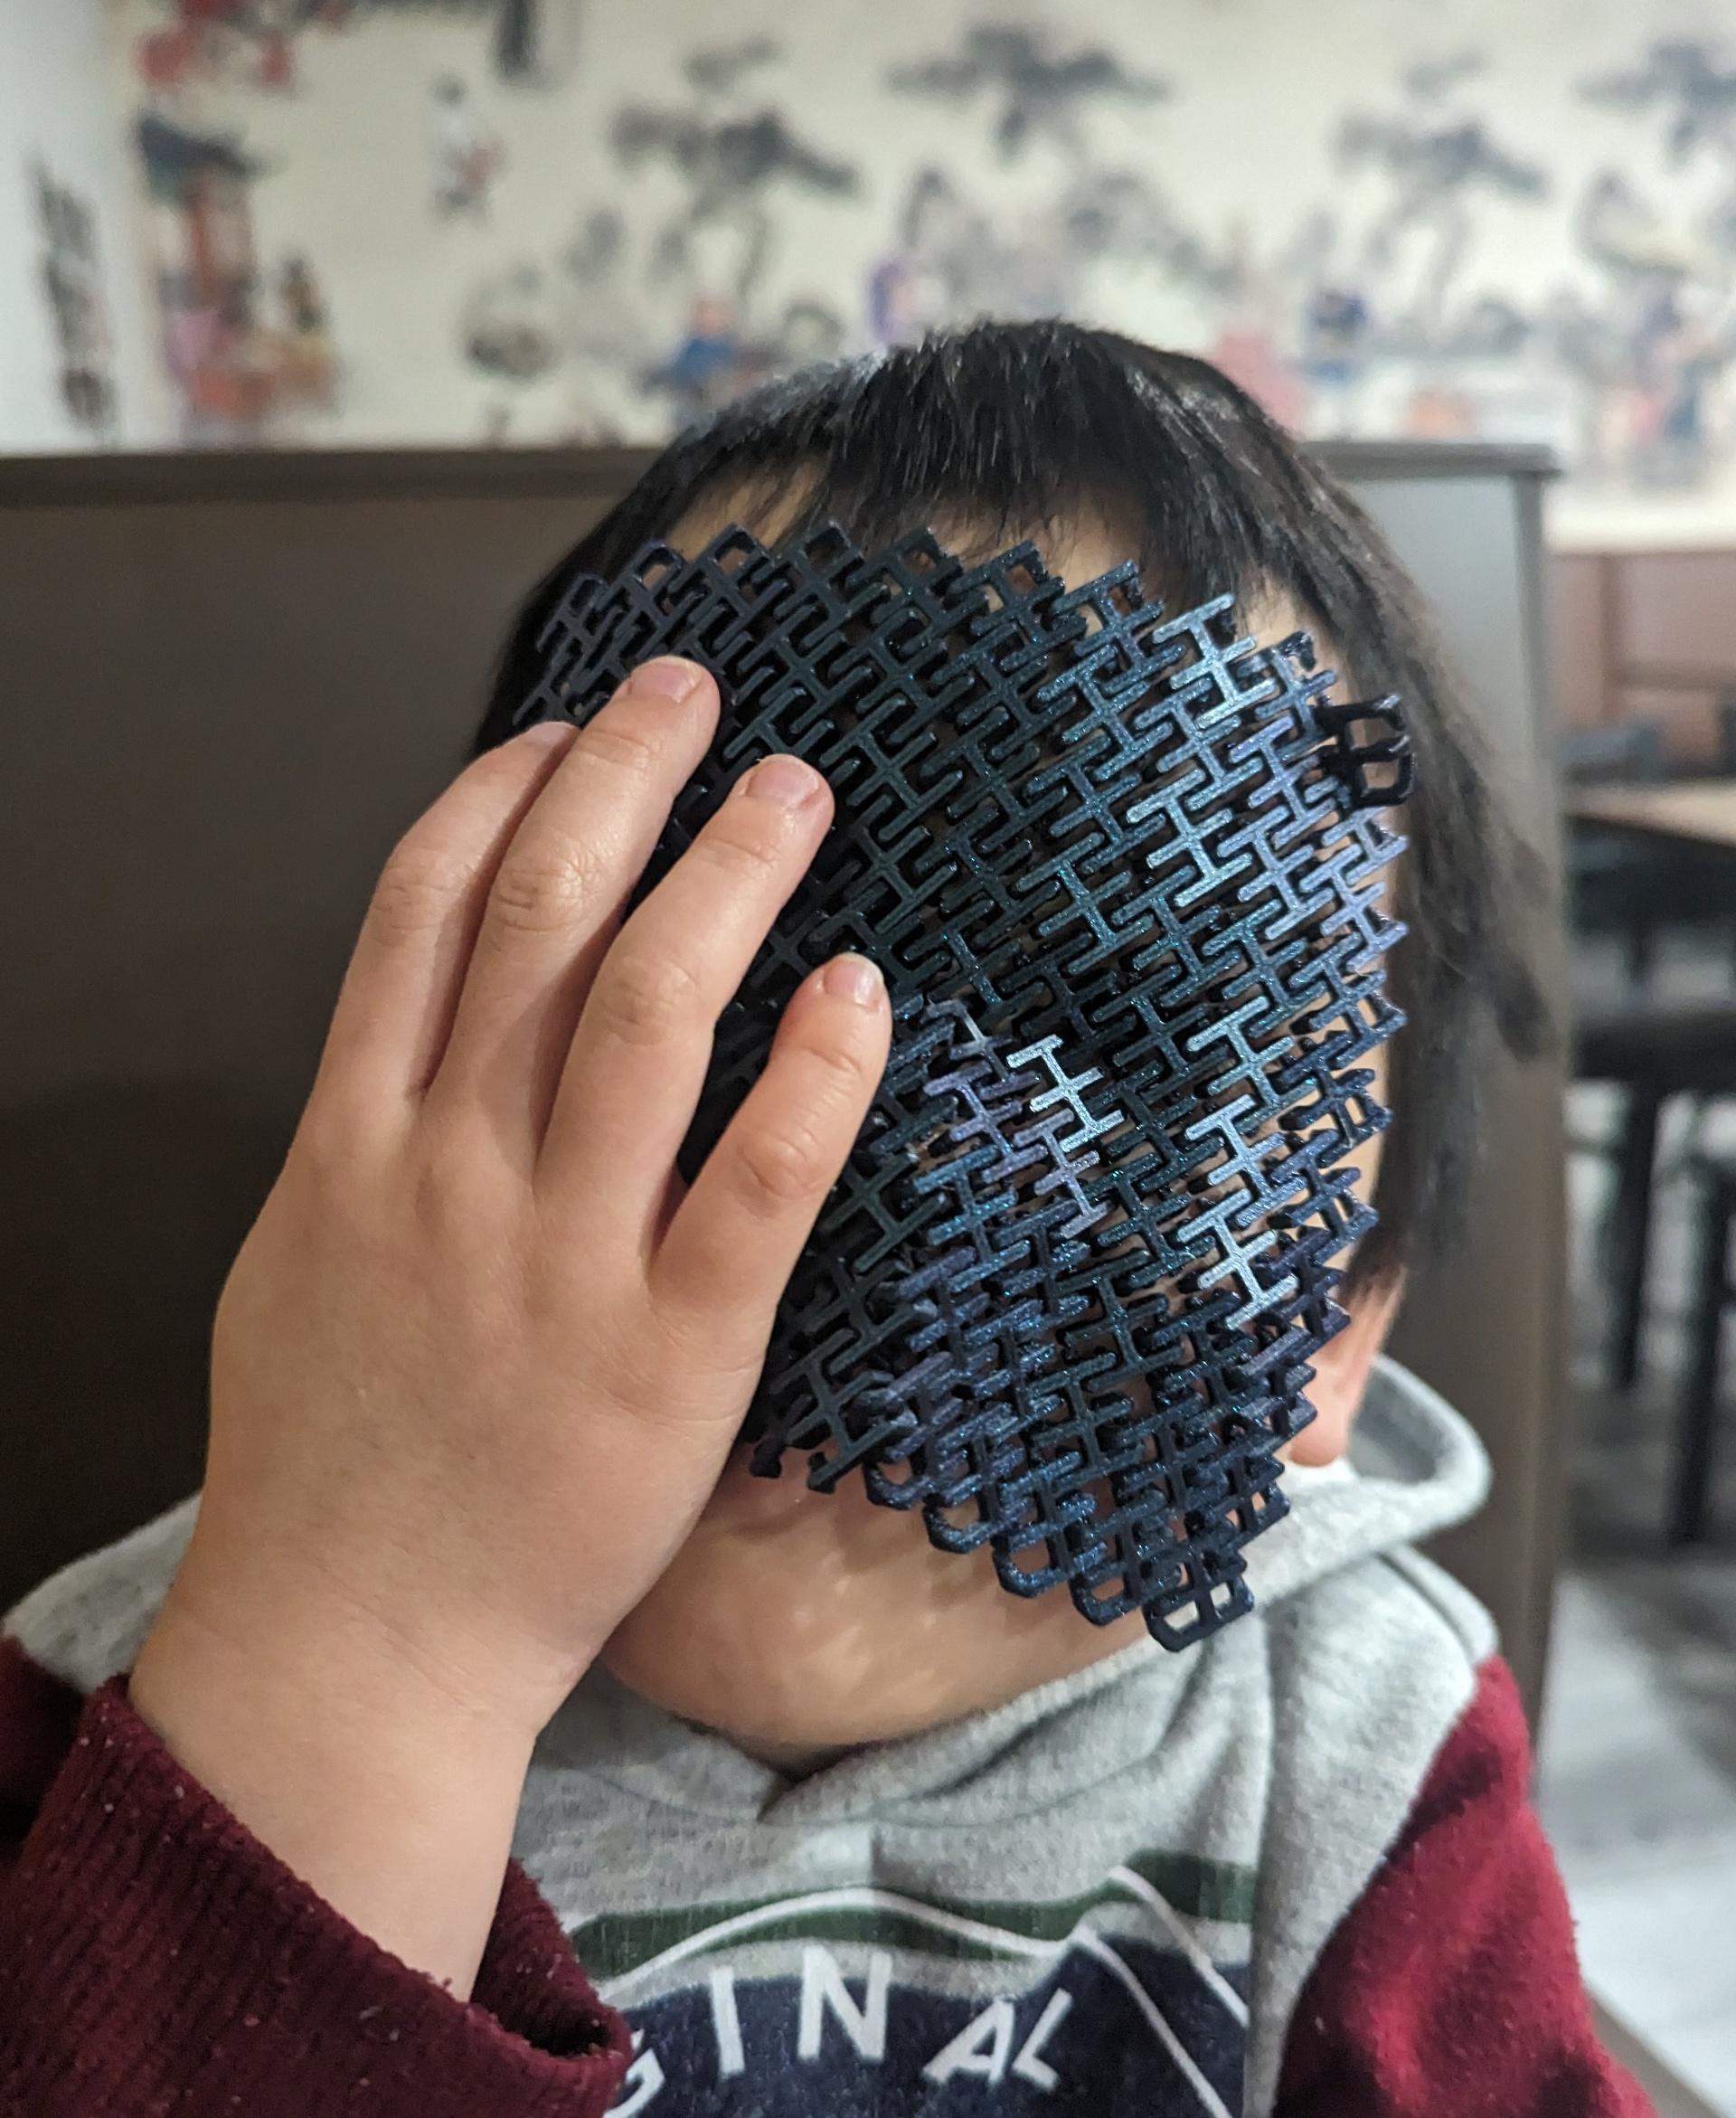 Chainmail 2.0 - Modular 3D Printable Fabric - Chainmail looks & works great! "Very satisfying" according to my kid - 3d model